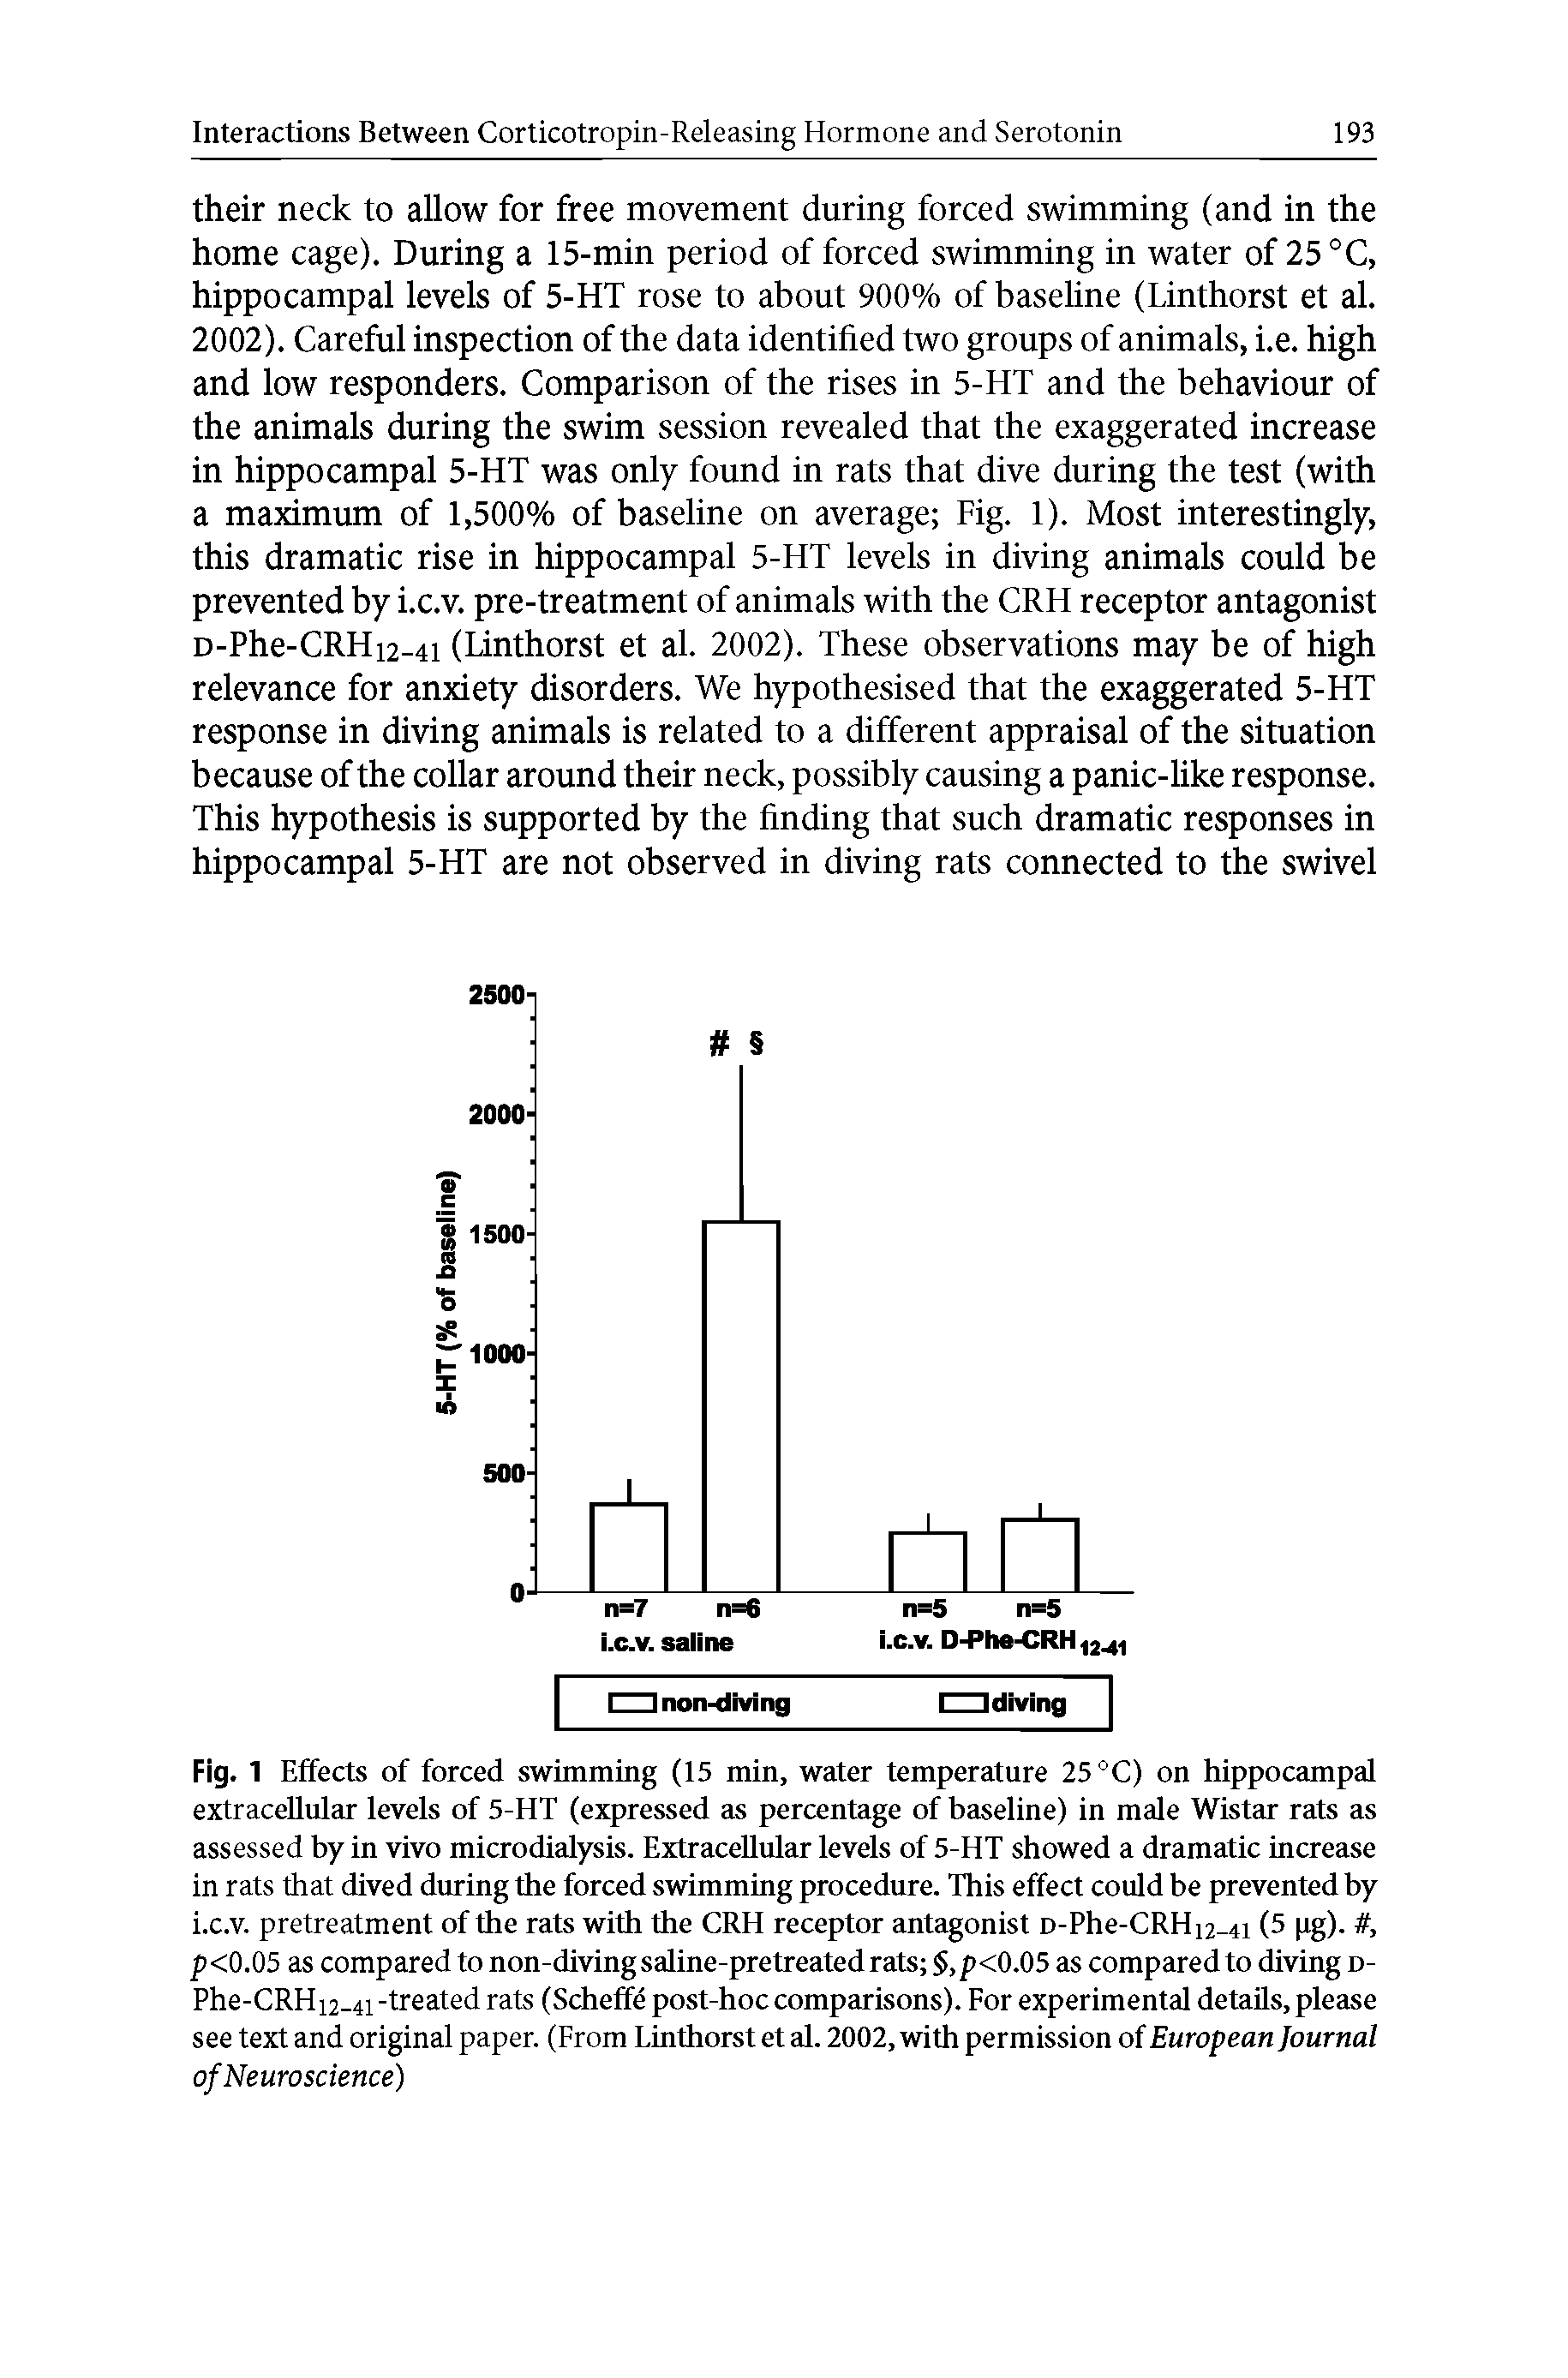 Fig. 1 Effects of forced swimming (15 min, water temperature 25 °C) on hippocampal extracellular levels of 5-HT (expressed as percentage of baseline) in male Wistar rats as assessed by in vivo microdialysis. Extracellular levels of 5-HT showed a dramatic increase in rats that dived diming the forced swimming procedure. This effect could be prevented by i.c.v. pretreatment of the rats with the CRH receptor antagonist o-Phe-CRH 12-41 (5 pg)., p<0.05 as compared to non-divingsaline-pretreated rats , p<0.05 as compared to diving d-Phe-CRHi2-4i -treated rats (Scheffe post-hoc comparisons). For experimental details, please see text and original paper. (From Linthorst et al. 2002, with permission of European Journal of Neuroscience)...